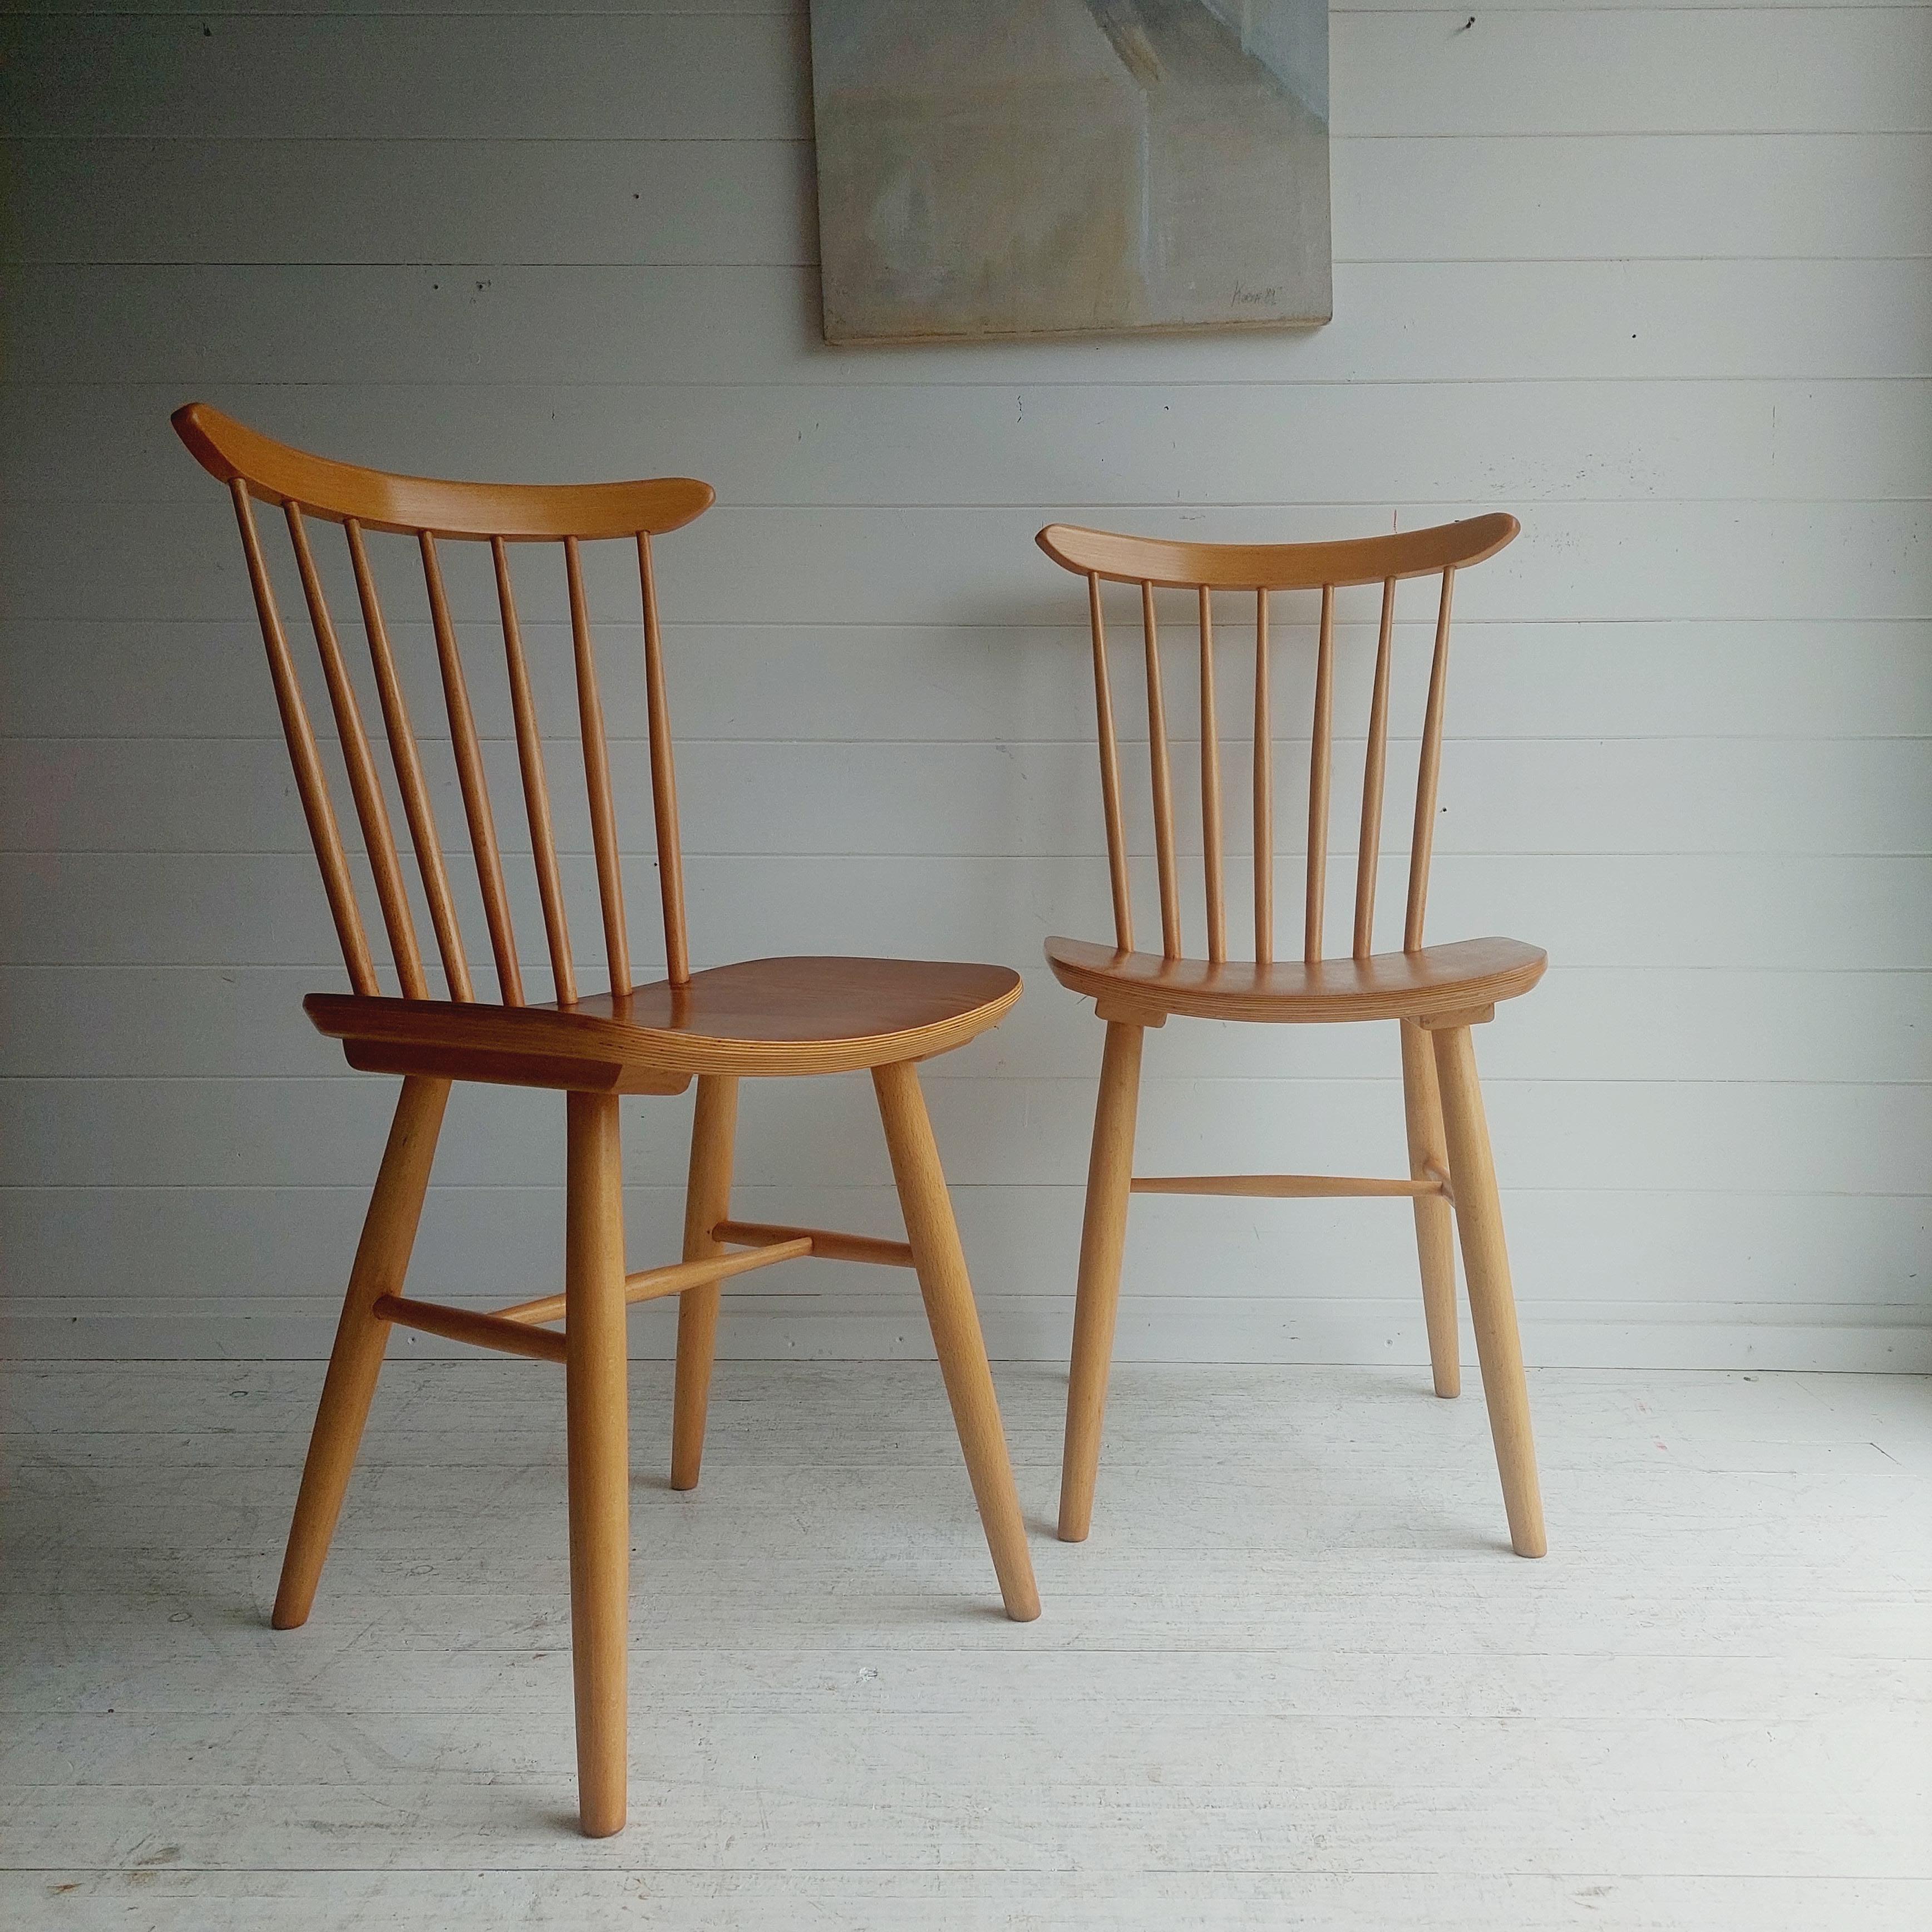 1950’s Harlequin Stickback Dining Chairs Mos probably By Ton – Set Of 2. 
Perfect and timeless design.
To suit eny interior home.
To be used as a desk chair, dining or kitchen chairs.

Date: 1950's
Maker: Probably Ton 
Country of origin: